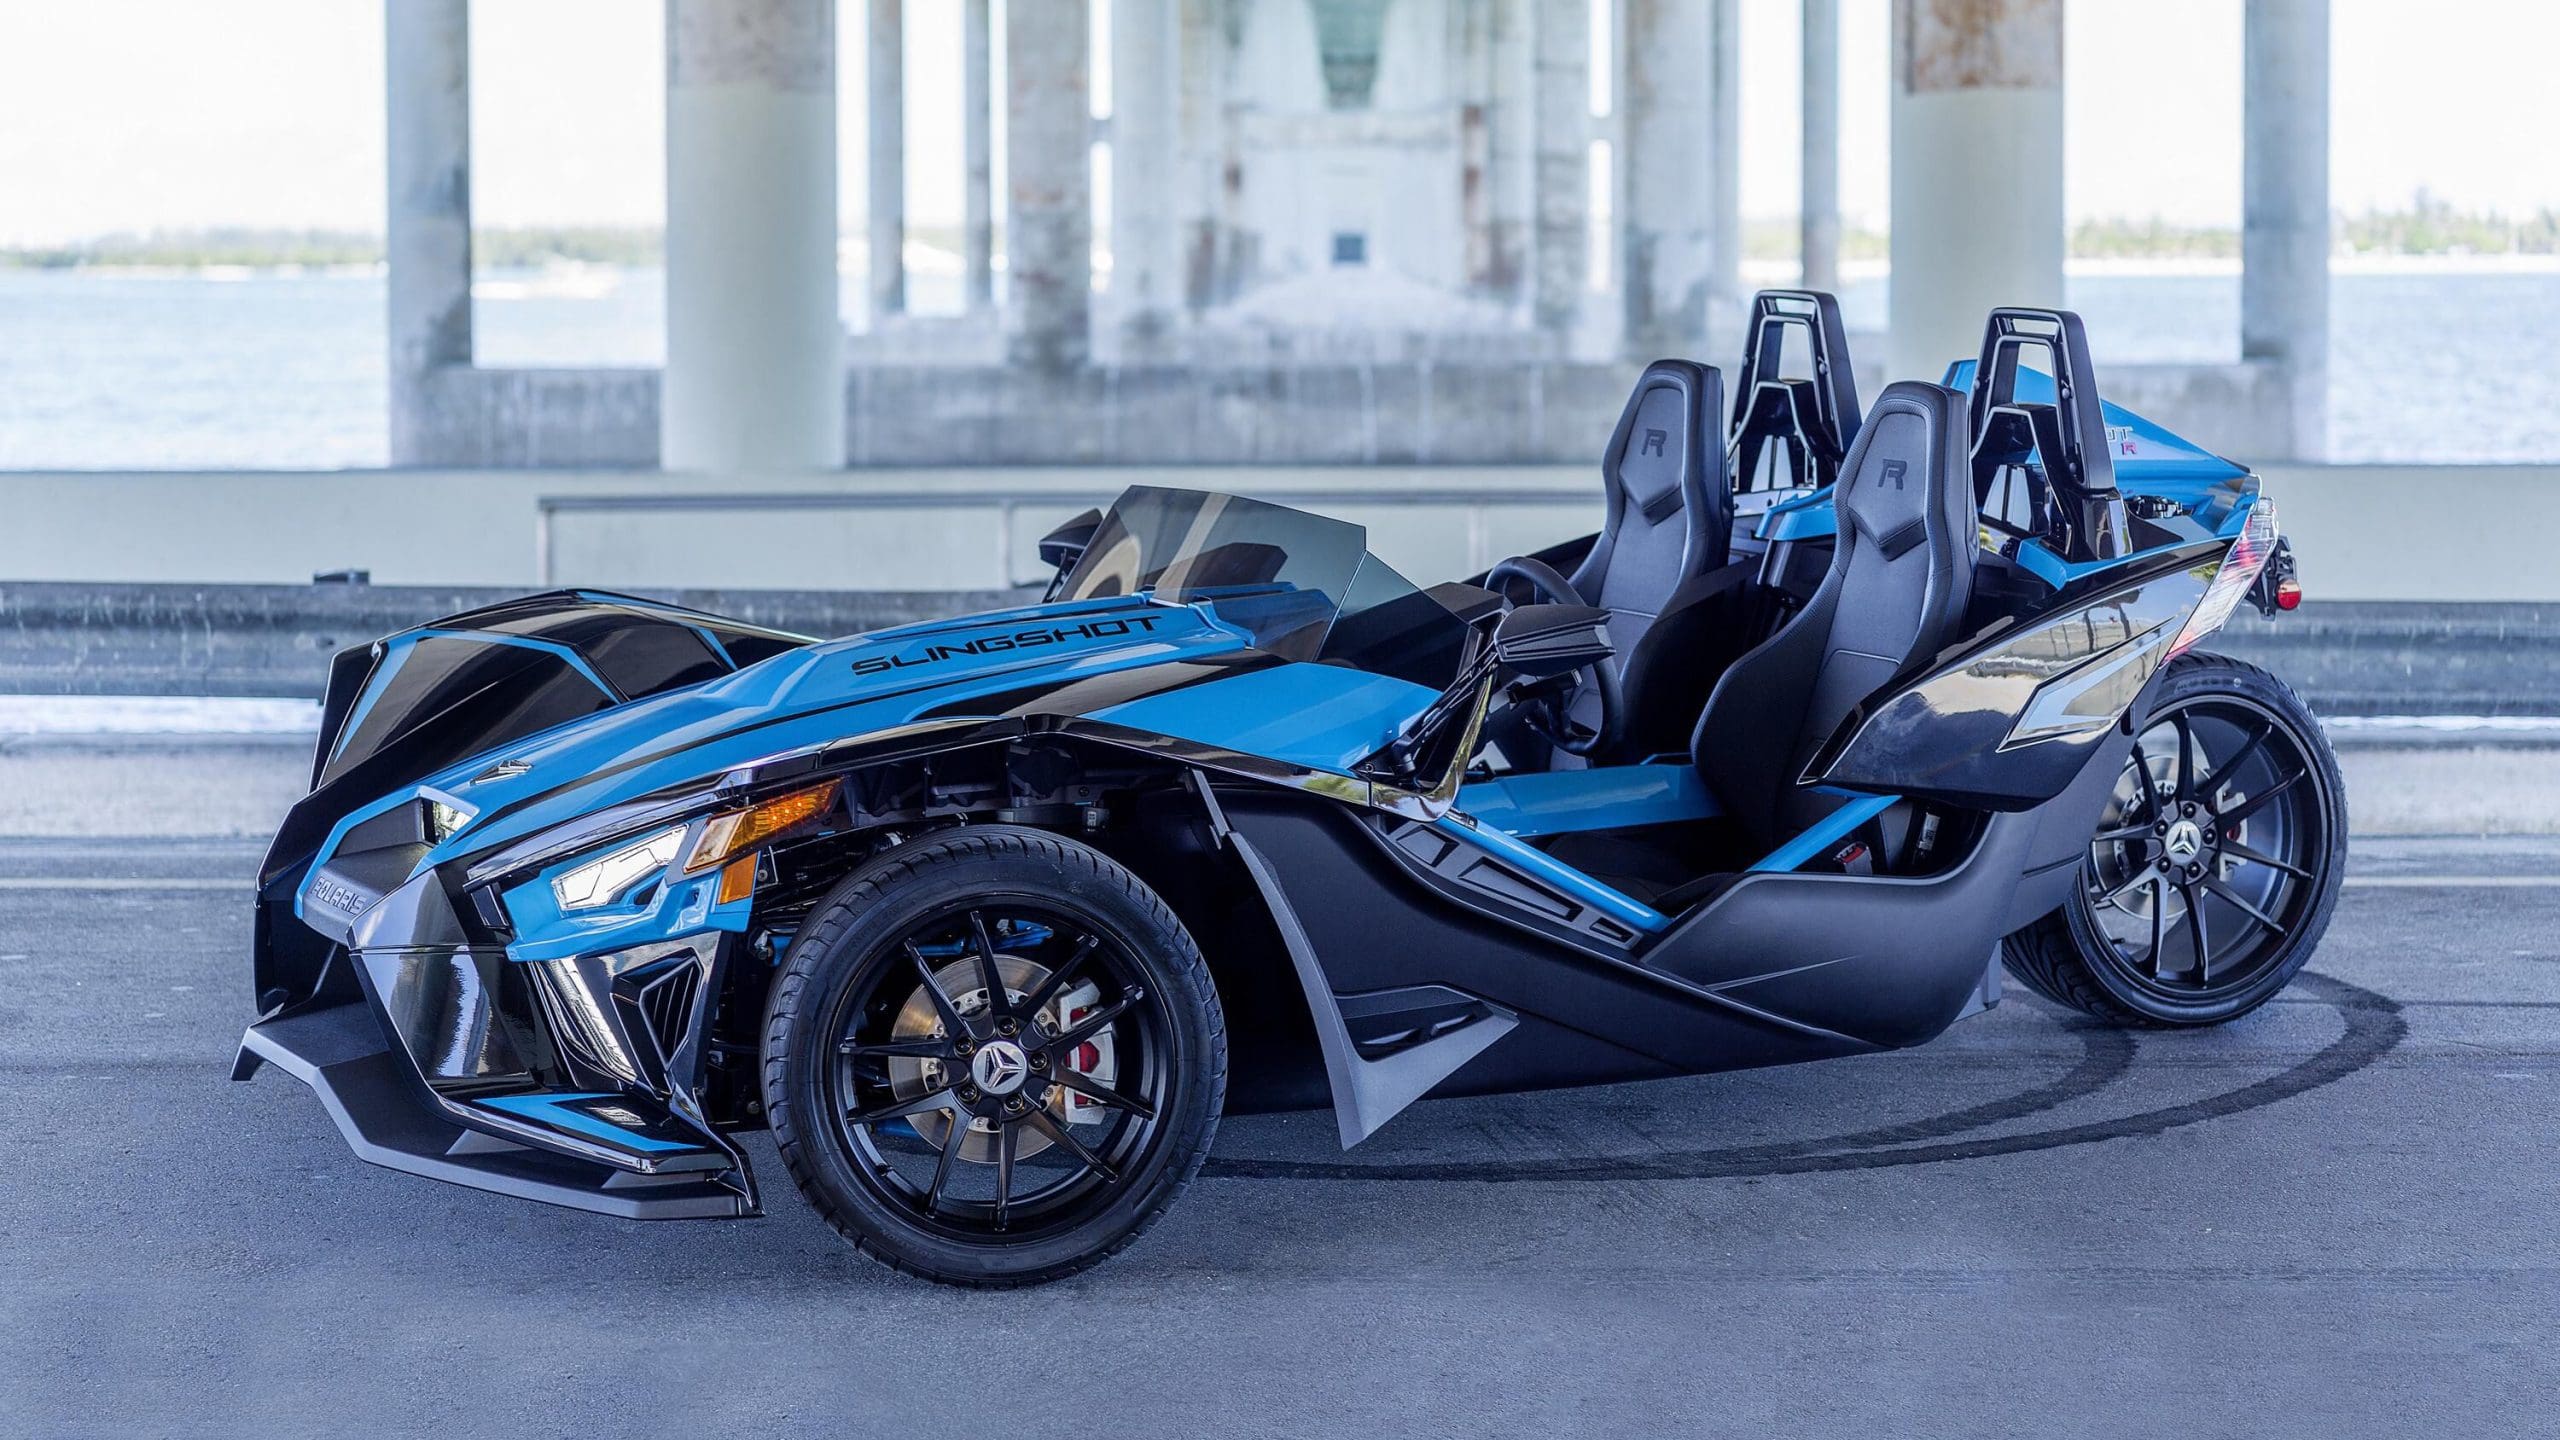 A view of the Polaris Slingshot - a vehicle that has been reclassified as an attocycle for the road of New York